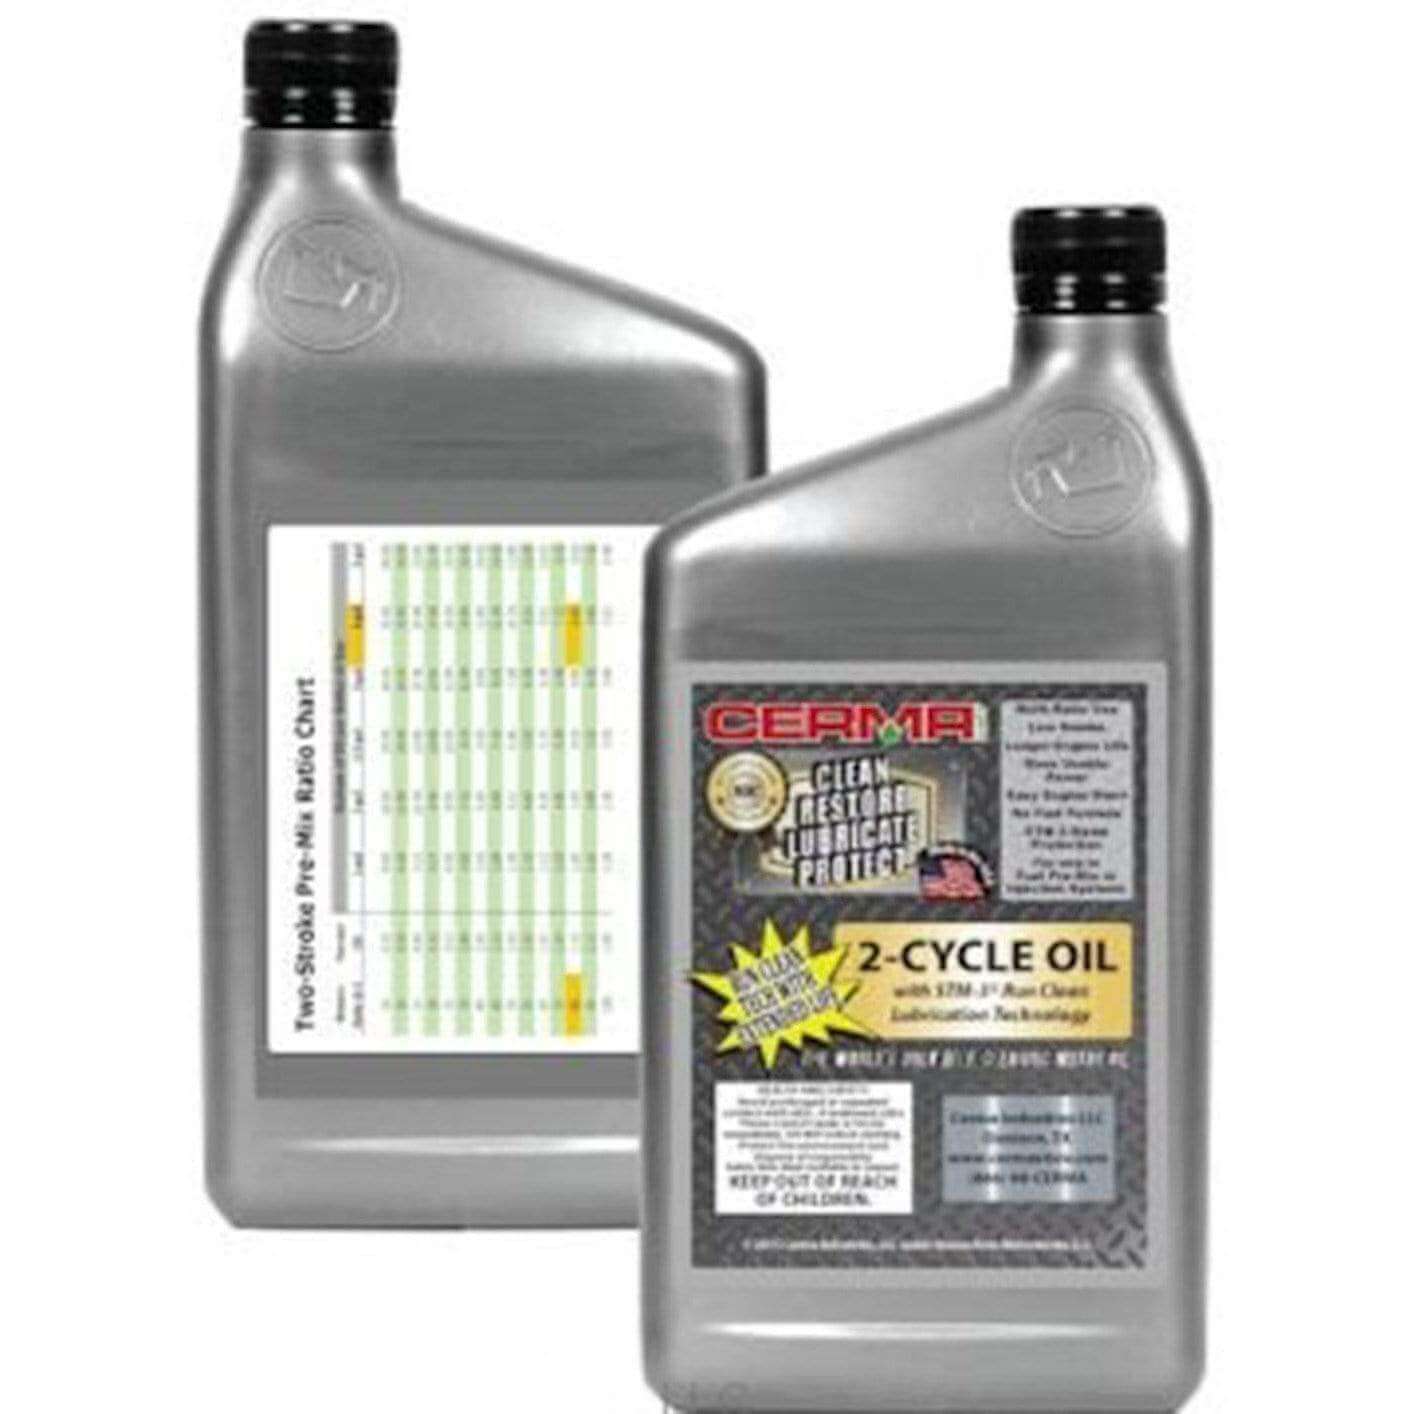 Cermax Ceramic 2-Cycle Multi-Ratio Oil at $30.18 only from cermatreatment.com